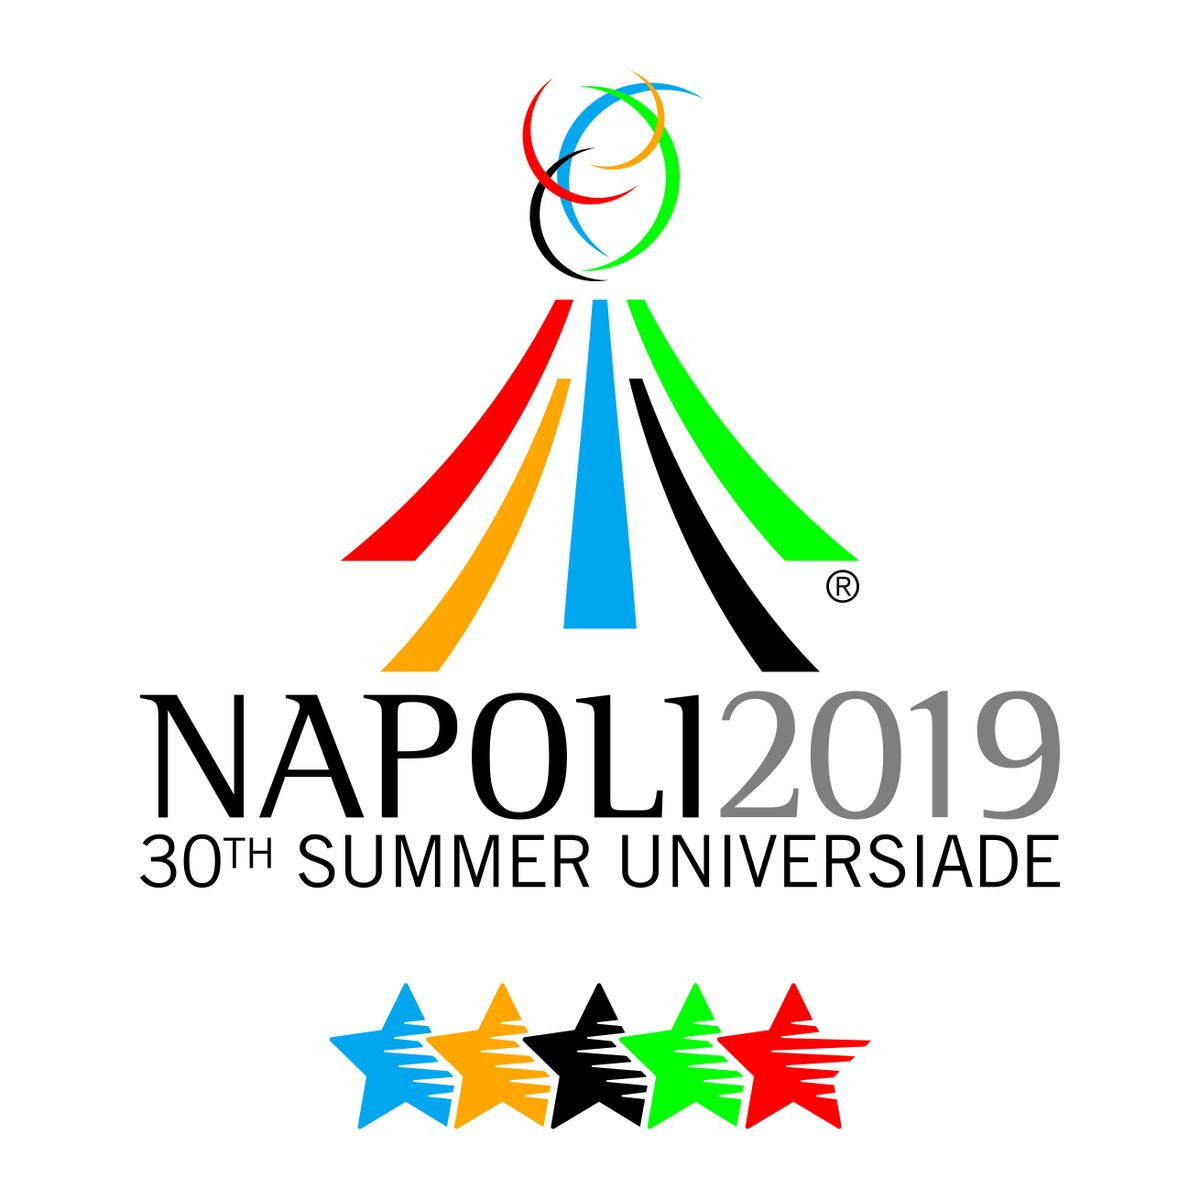 Naples 2019 receives support from Italian sports federations